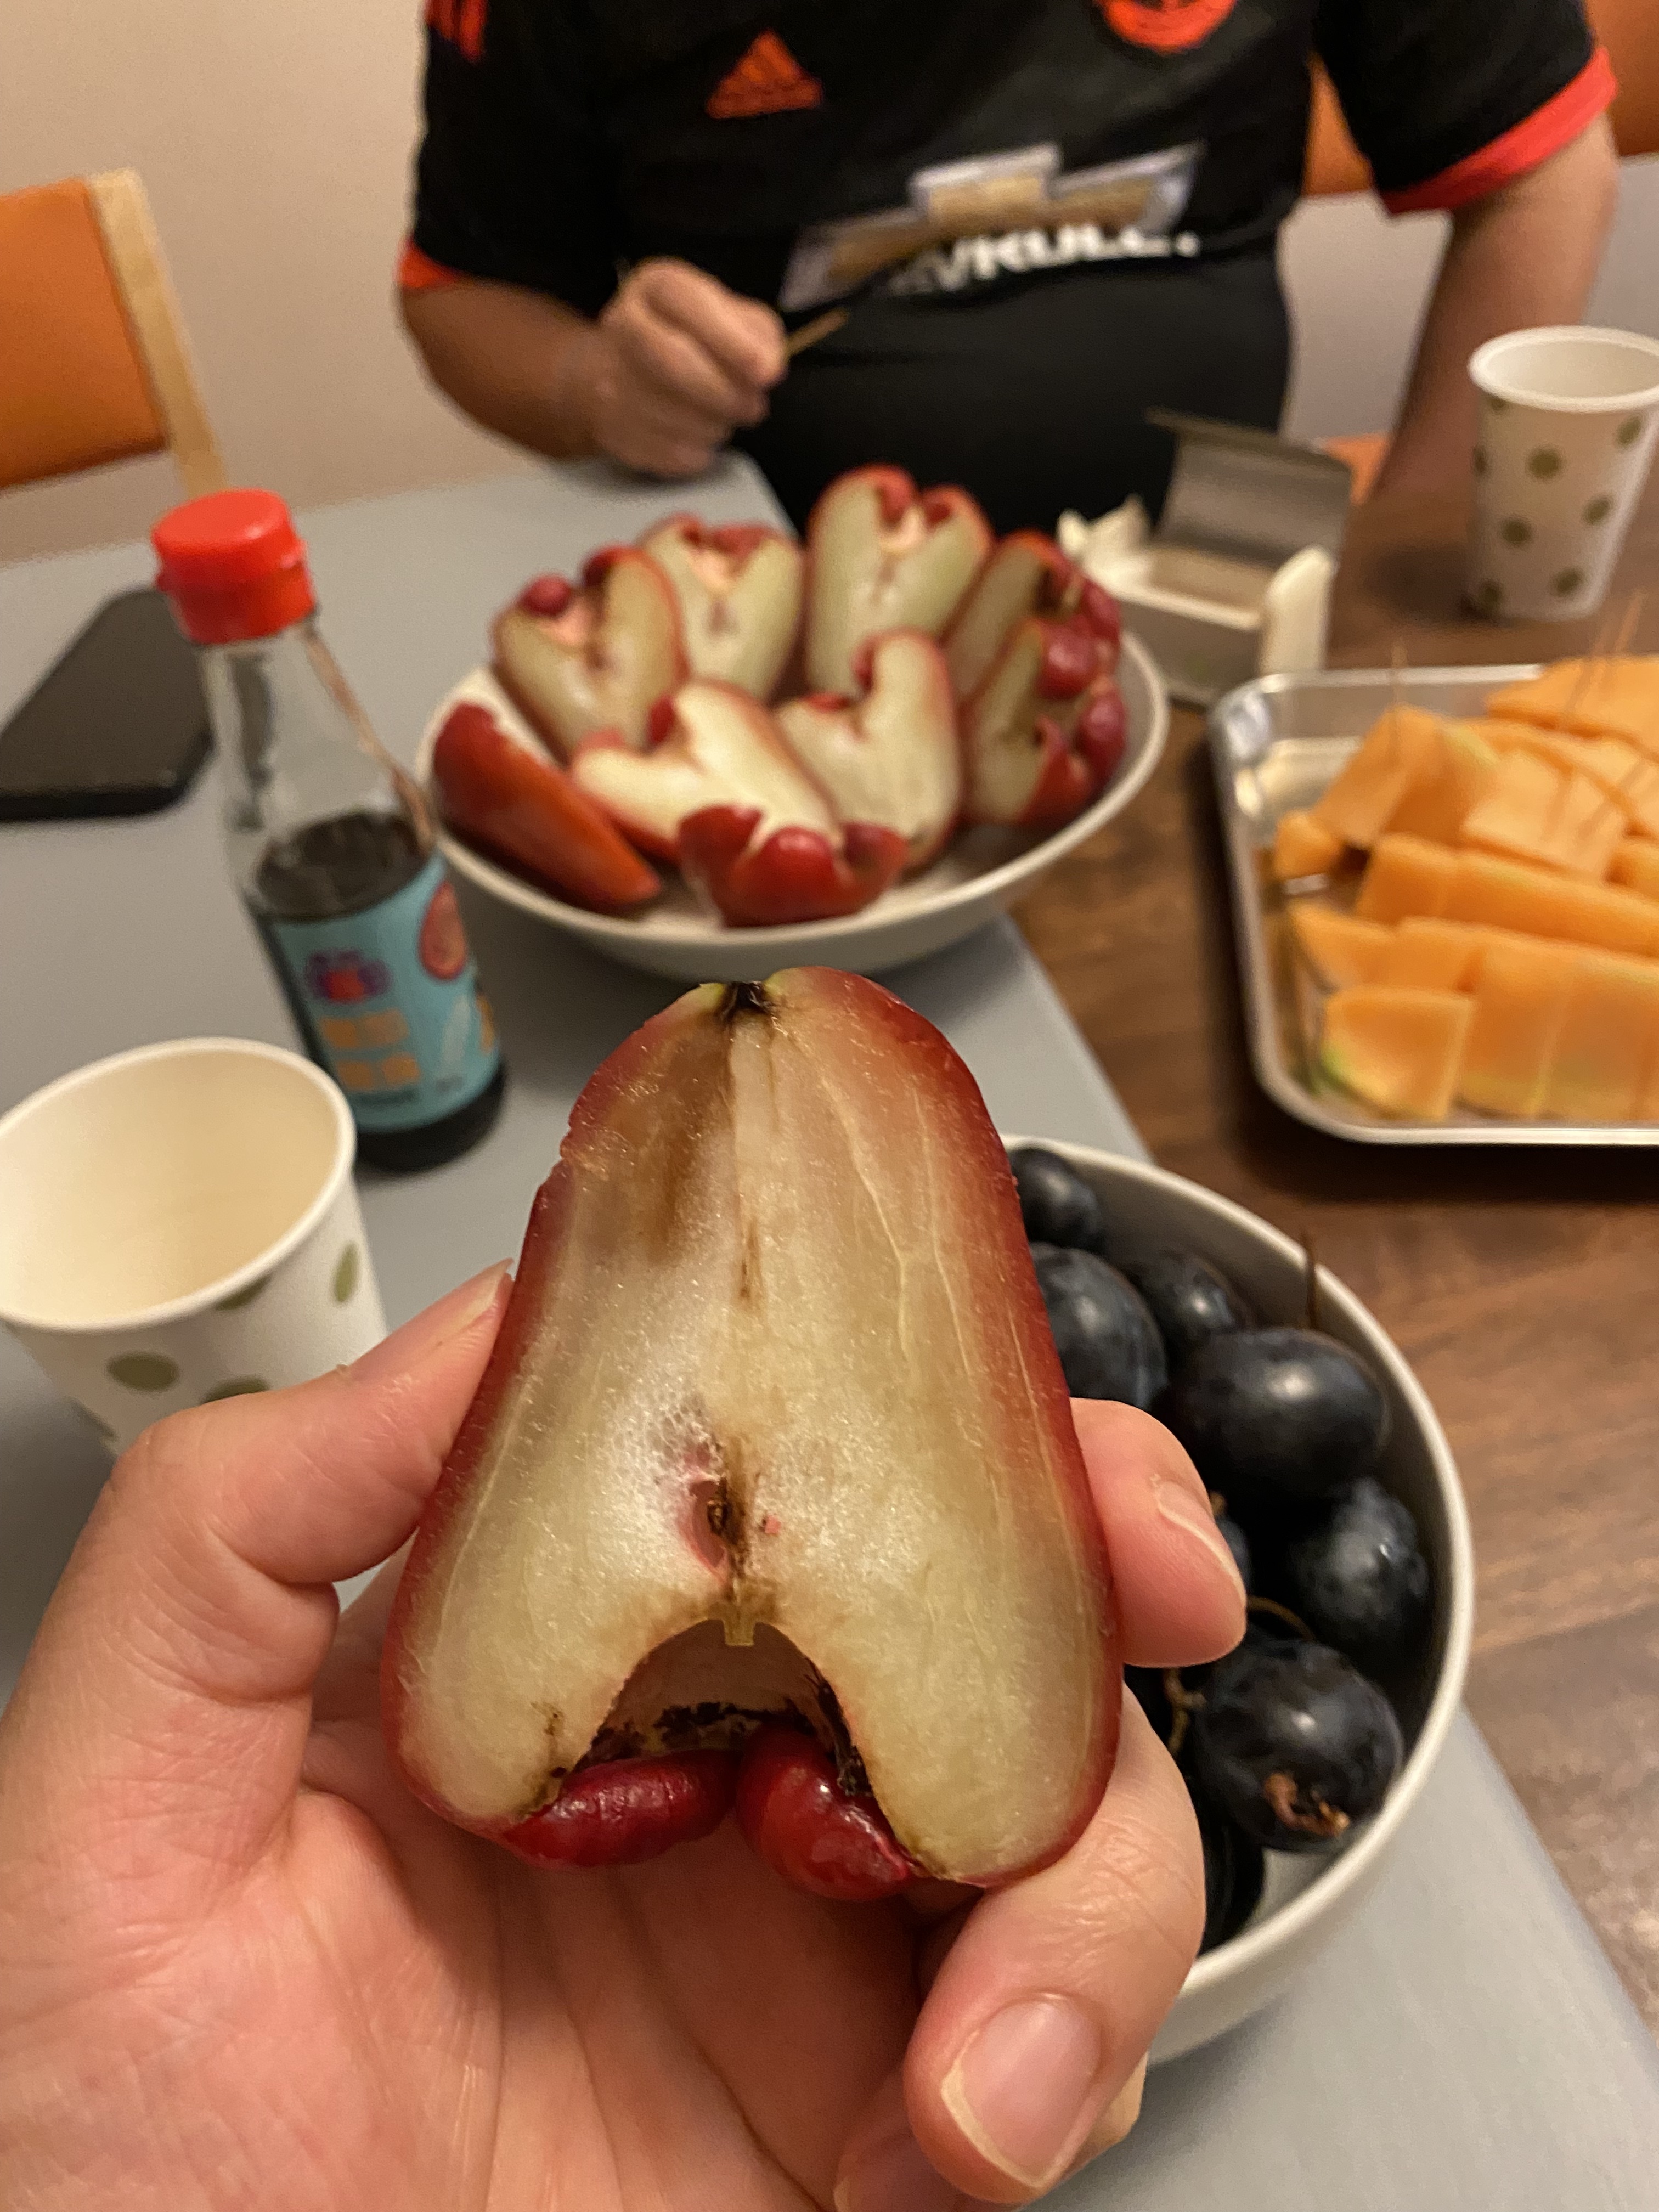 what fruit is this?